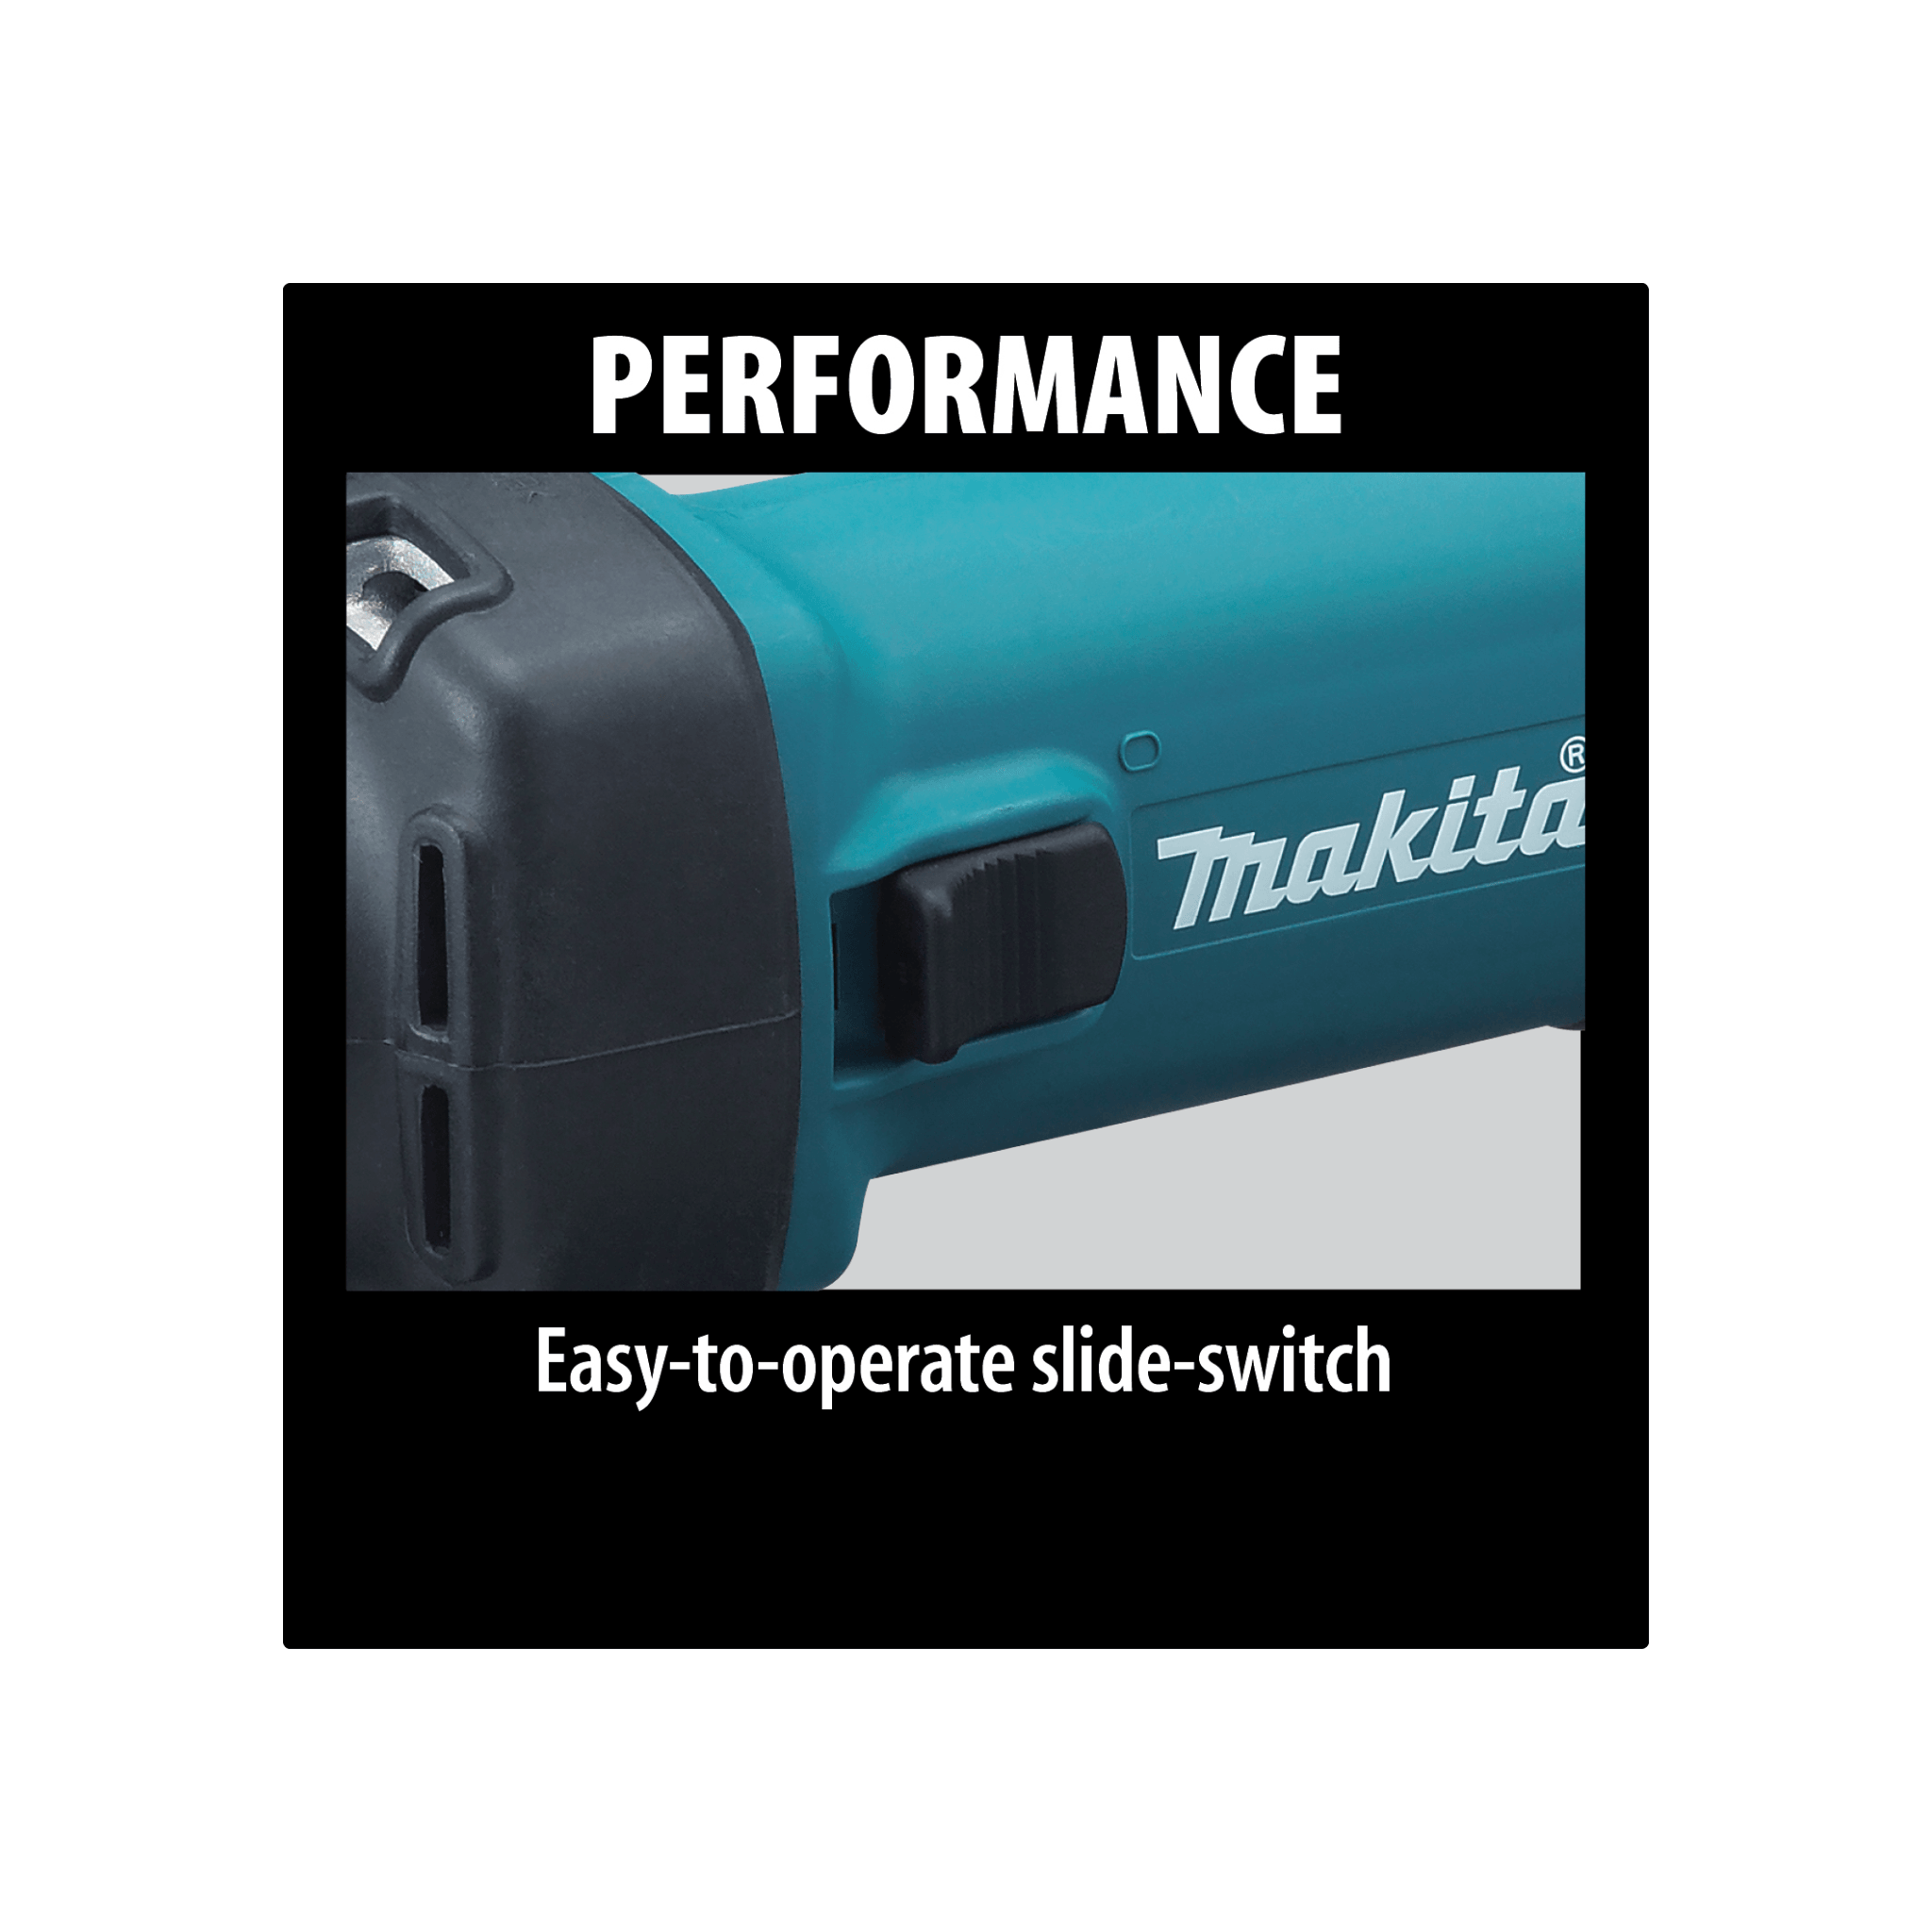 Makita GD0601 1/4" Die Grinder, with AC/DC Switch - Direct Stone Tool Supply, Inc